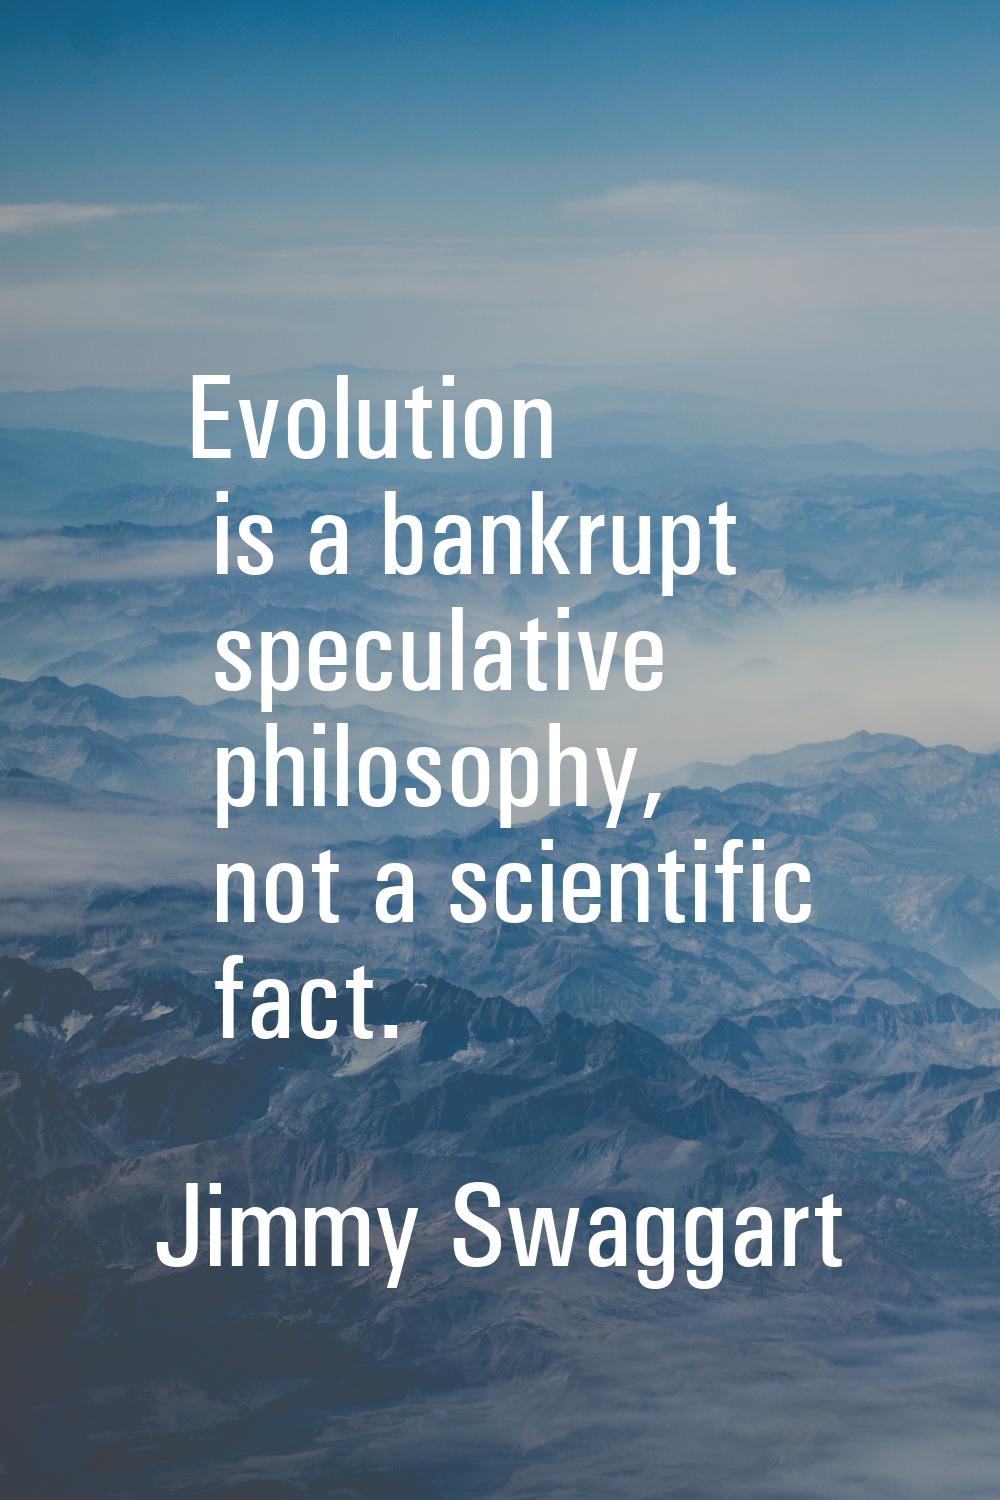 Evolution is a bankrupt speculative philosophy, not a scientific fact.